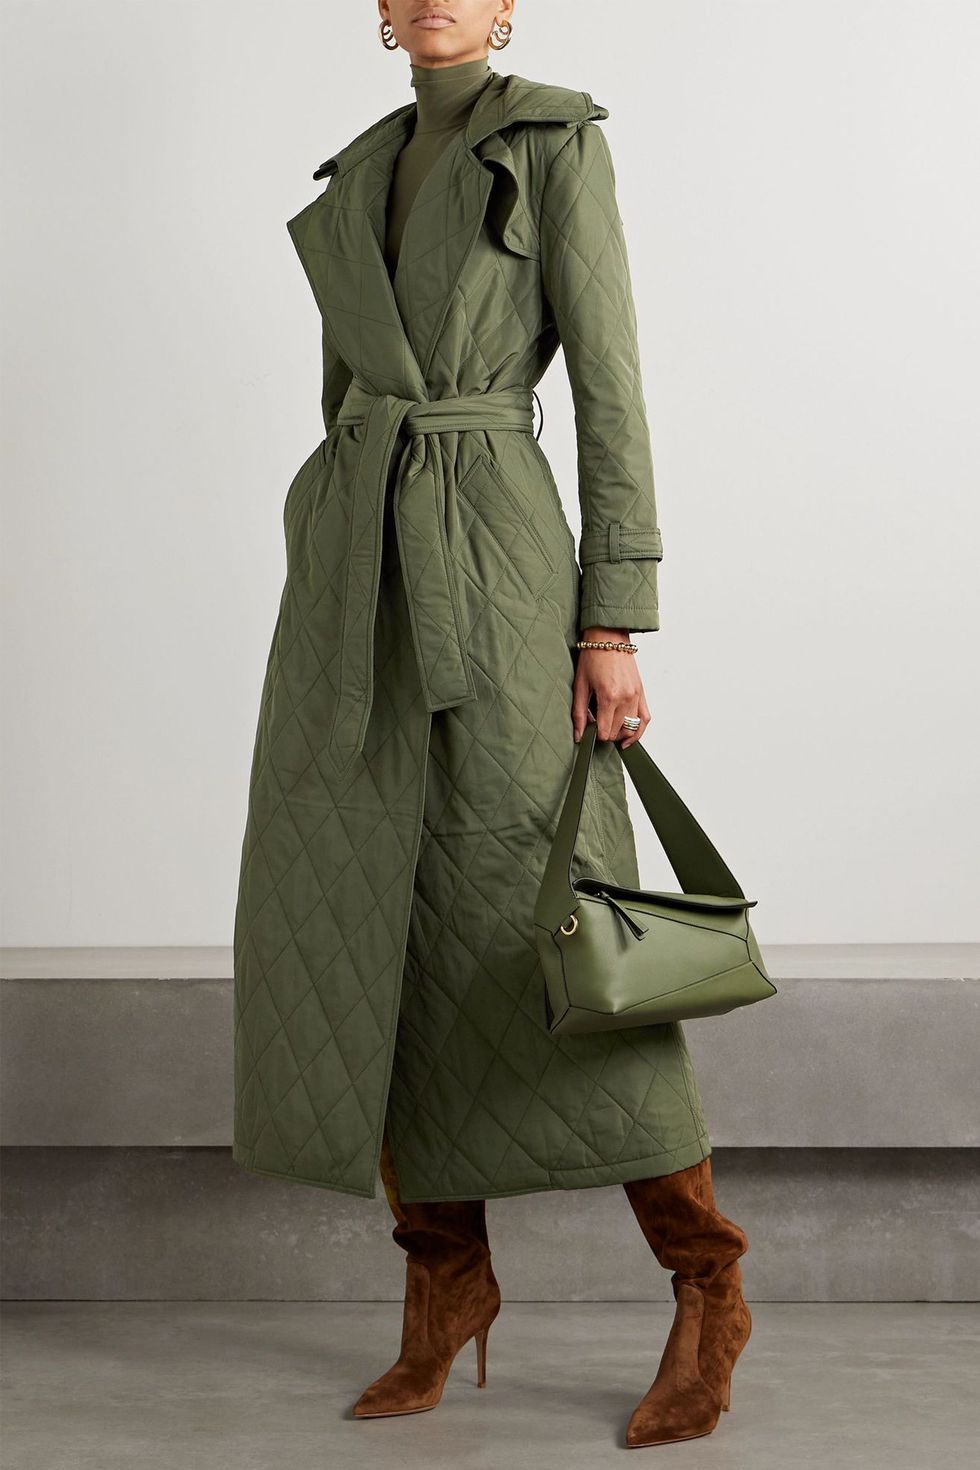 The 20 Best Trench Coats for Women That Will Outlast the Trend